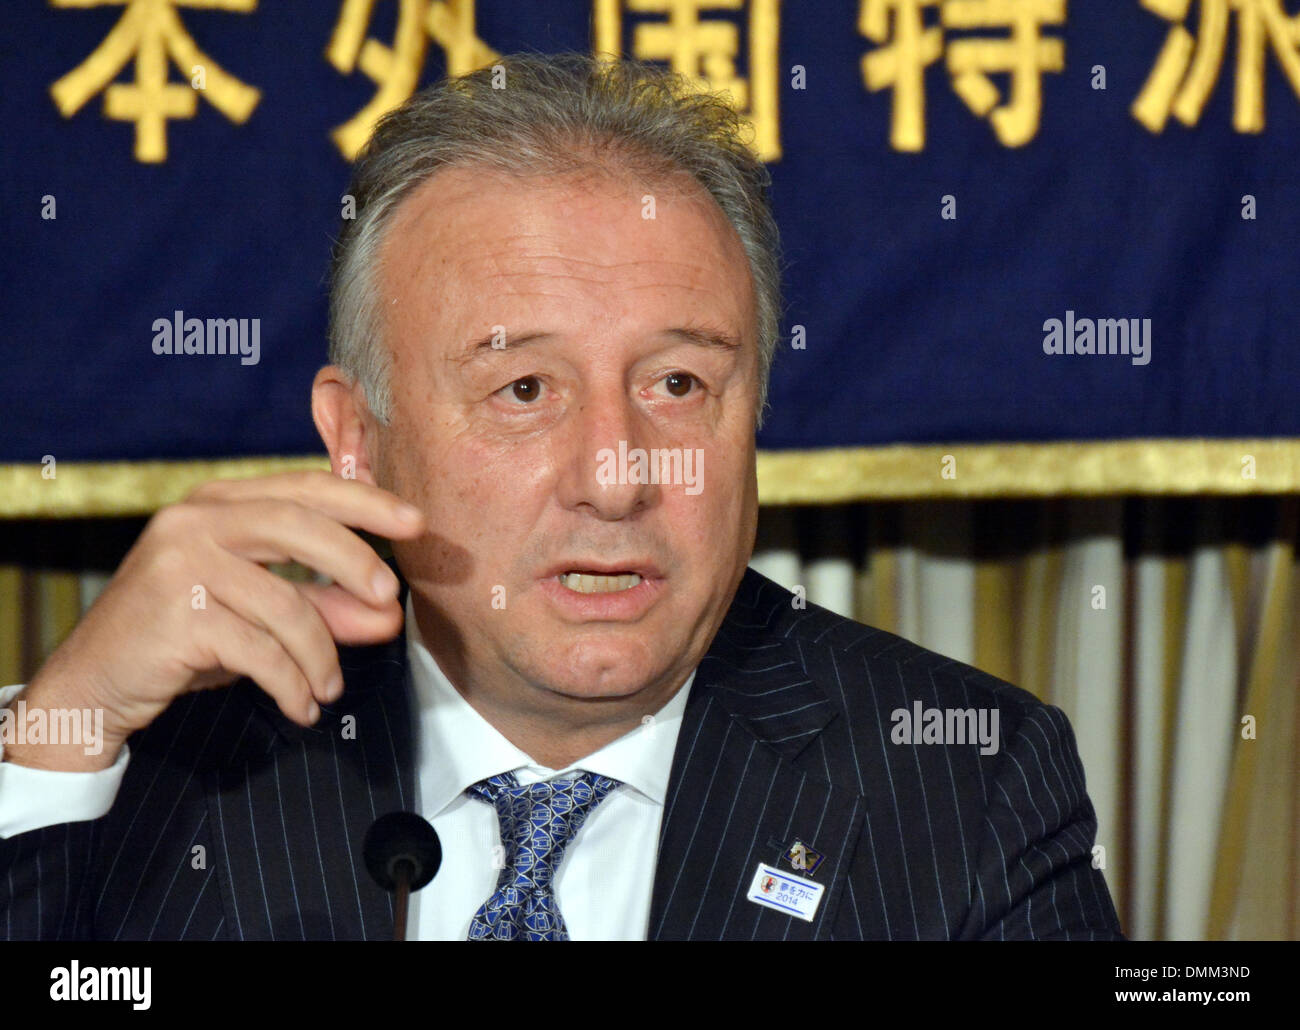 Tokyo, Japan. 16th Dec, 2013. Alberto Zaccheroni, the Italian head coach of japan's national football team, speaks before the foreign and domestic media during a news conference at Tokyo's Foreign Correspondents' Club of Japan on Monday, December 16, 2013. Zaccheroni and his 11 in the Samurai Blue will meet Ivory Coast, Colombia and Greece in the 2014 FIFA World Cup elimination round slated for June in Brazil. Credit:  Natsuki Sakai/AFLO/Alamy Live News Stock Photo